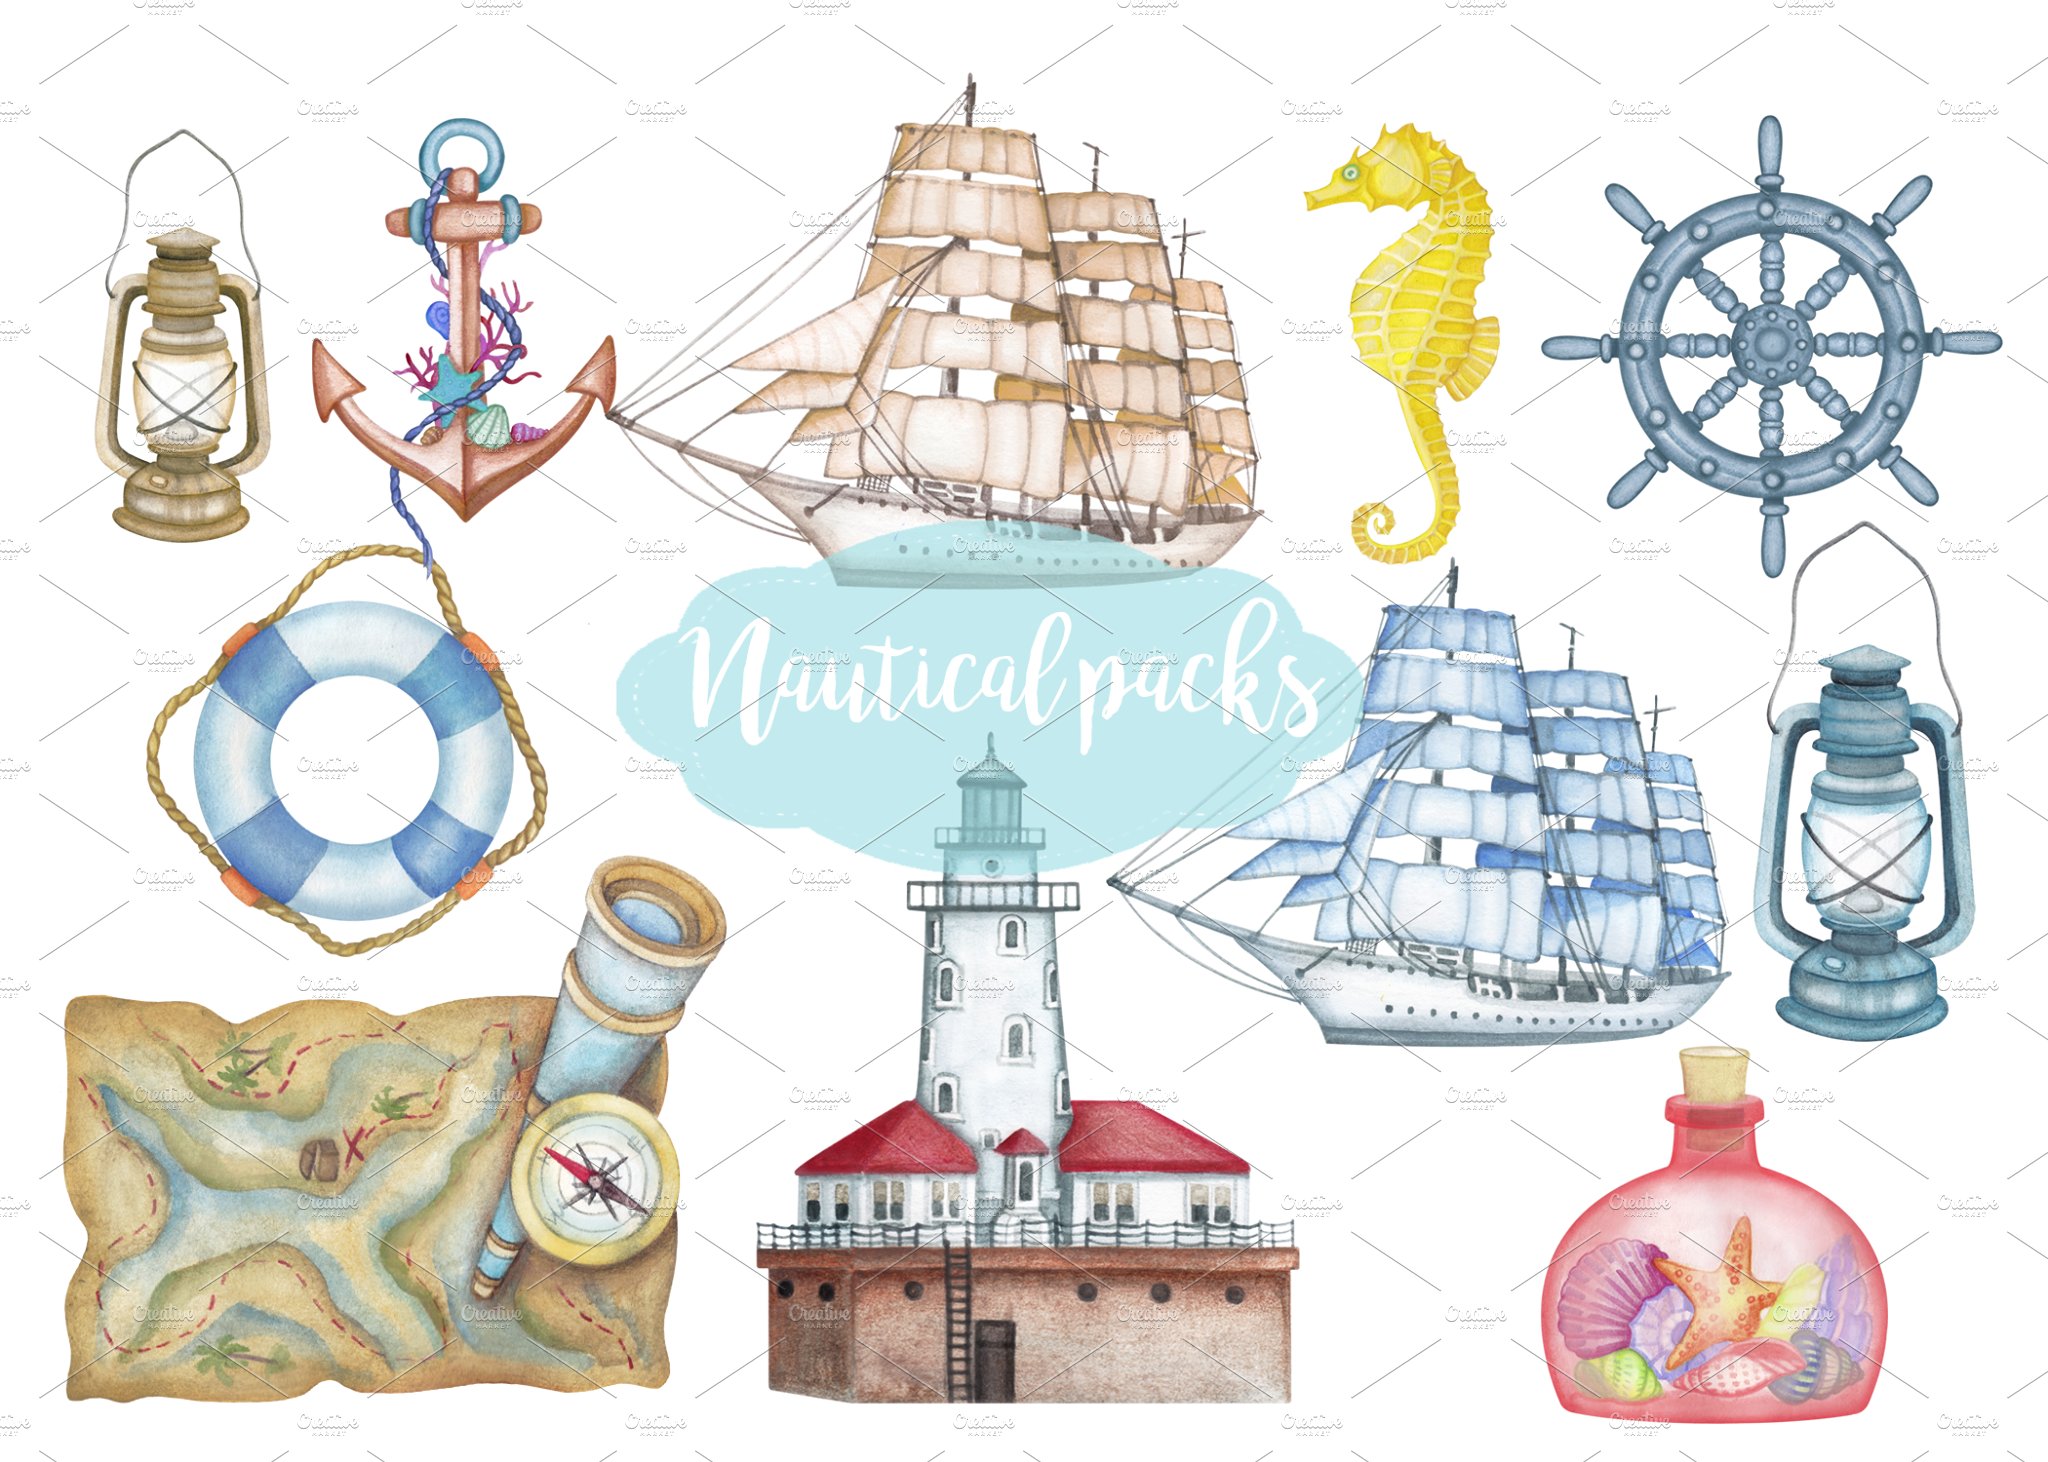 Big nautical packs for your creative projects.